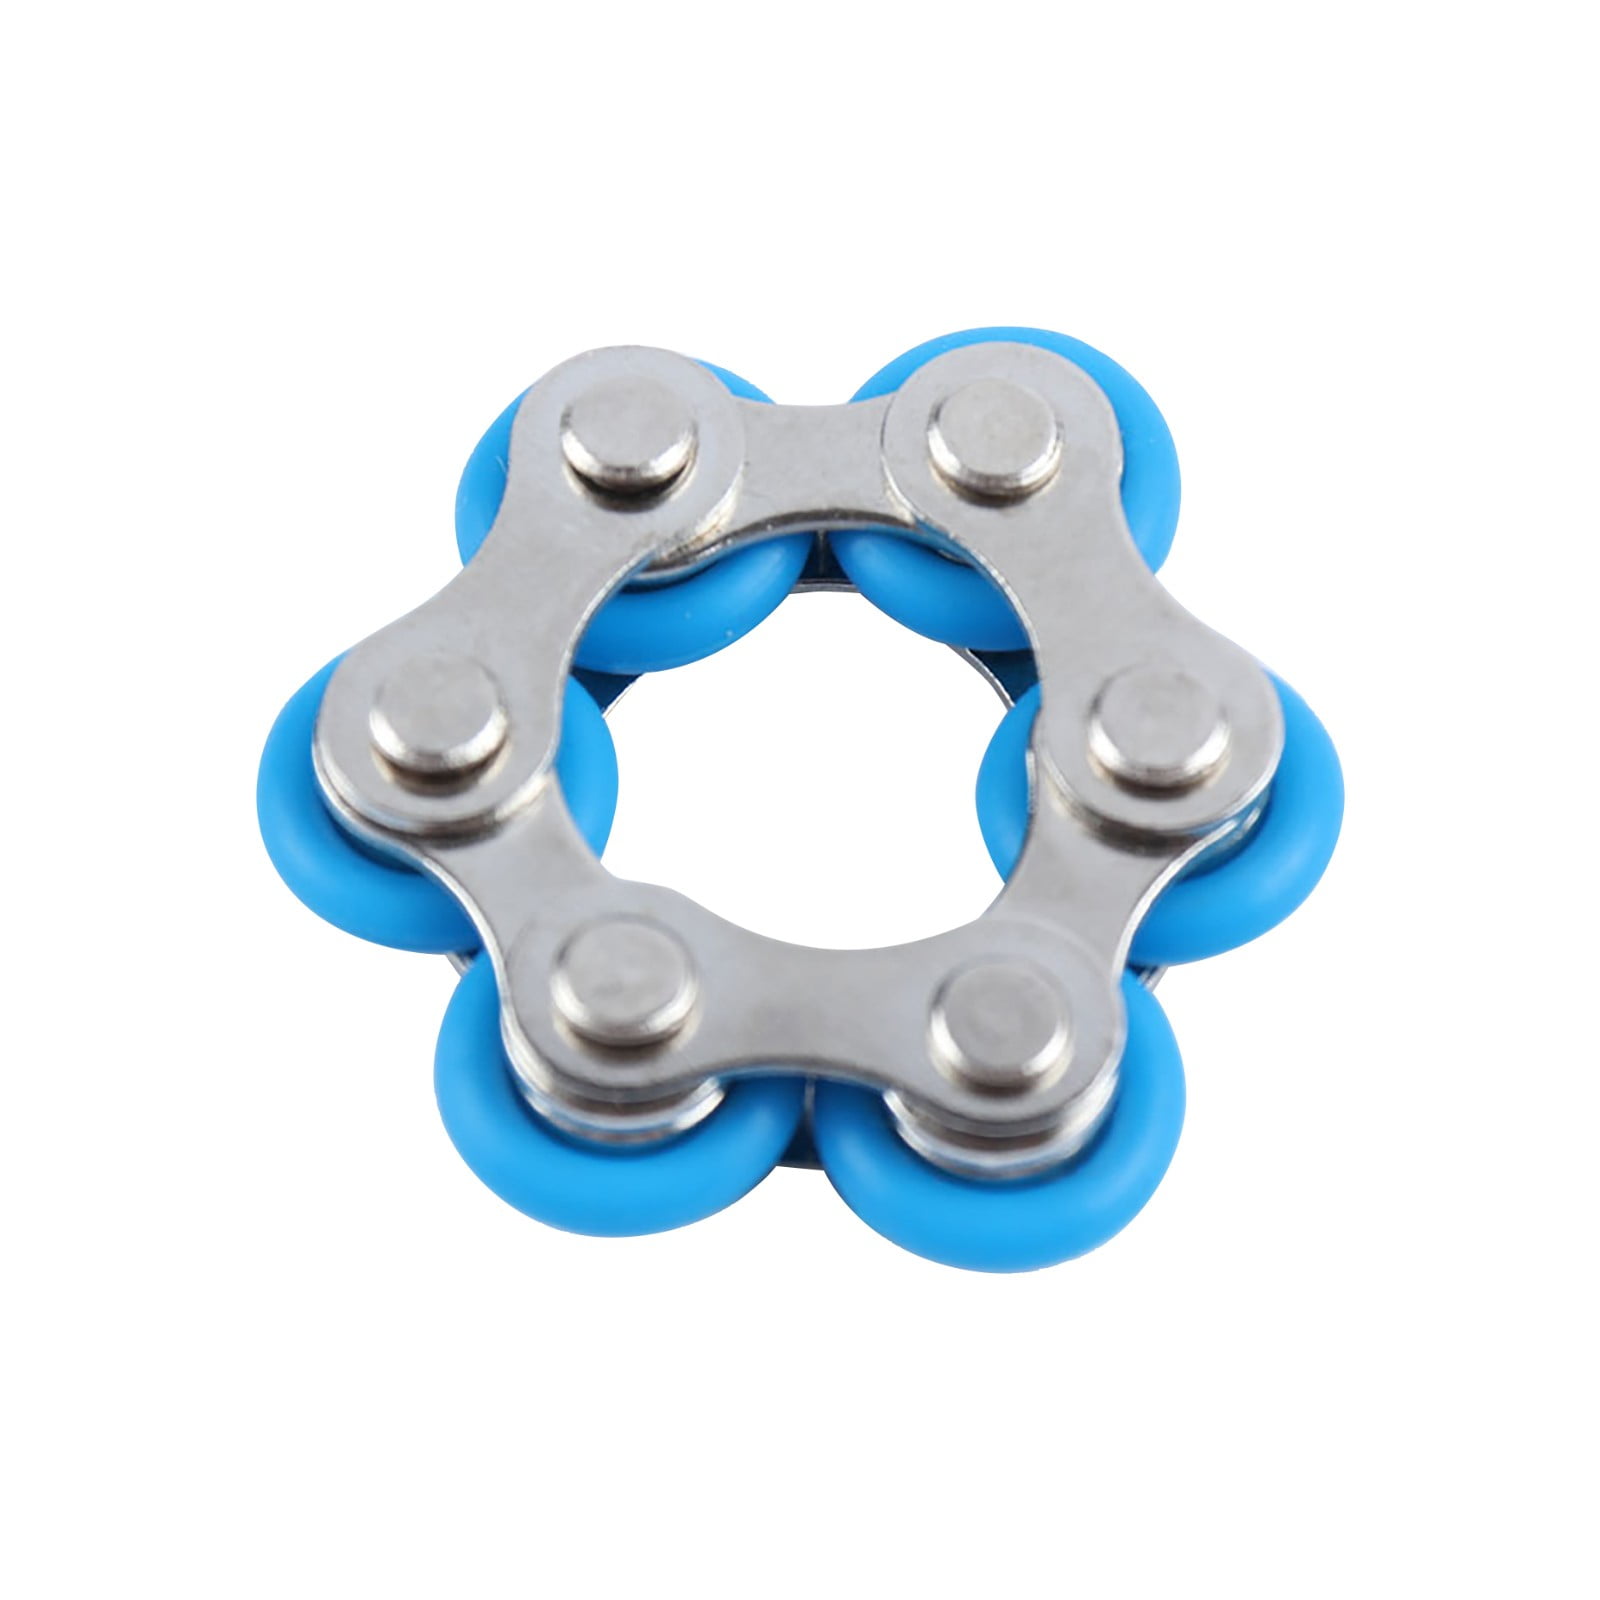 ADD 10 Pieces Roller Fidget Toy Stress Relief Perfect for ADHD Classrooms 